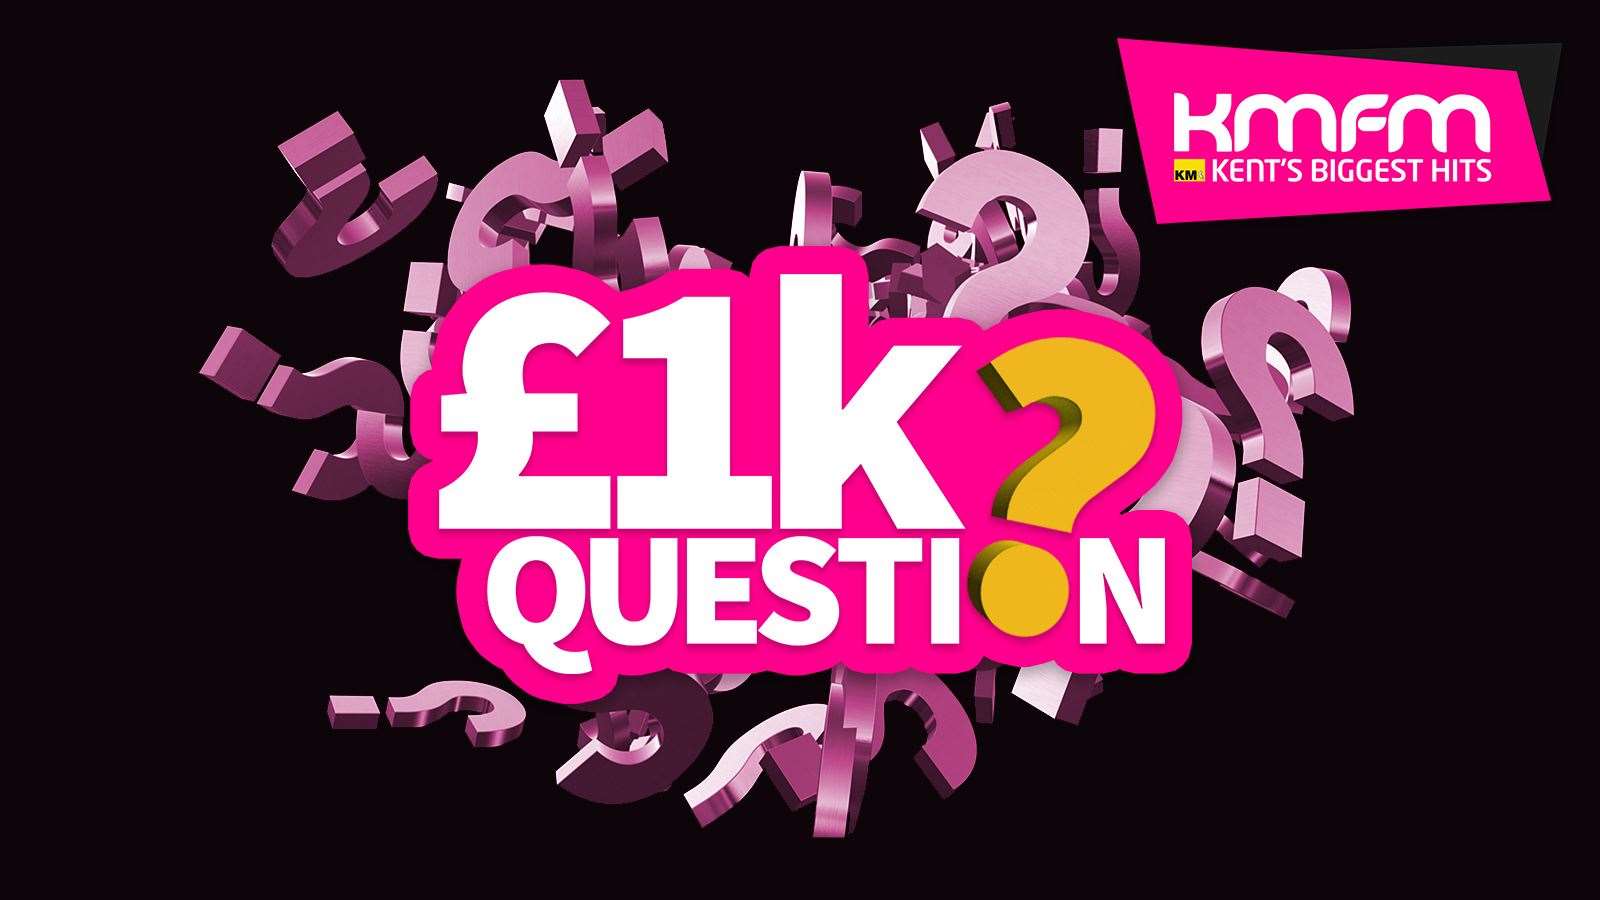 You could win the £1k Question on kmfm (8137968)